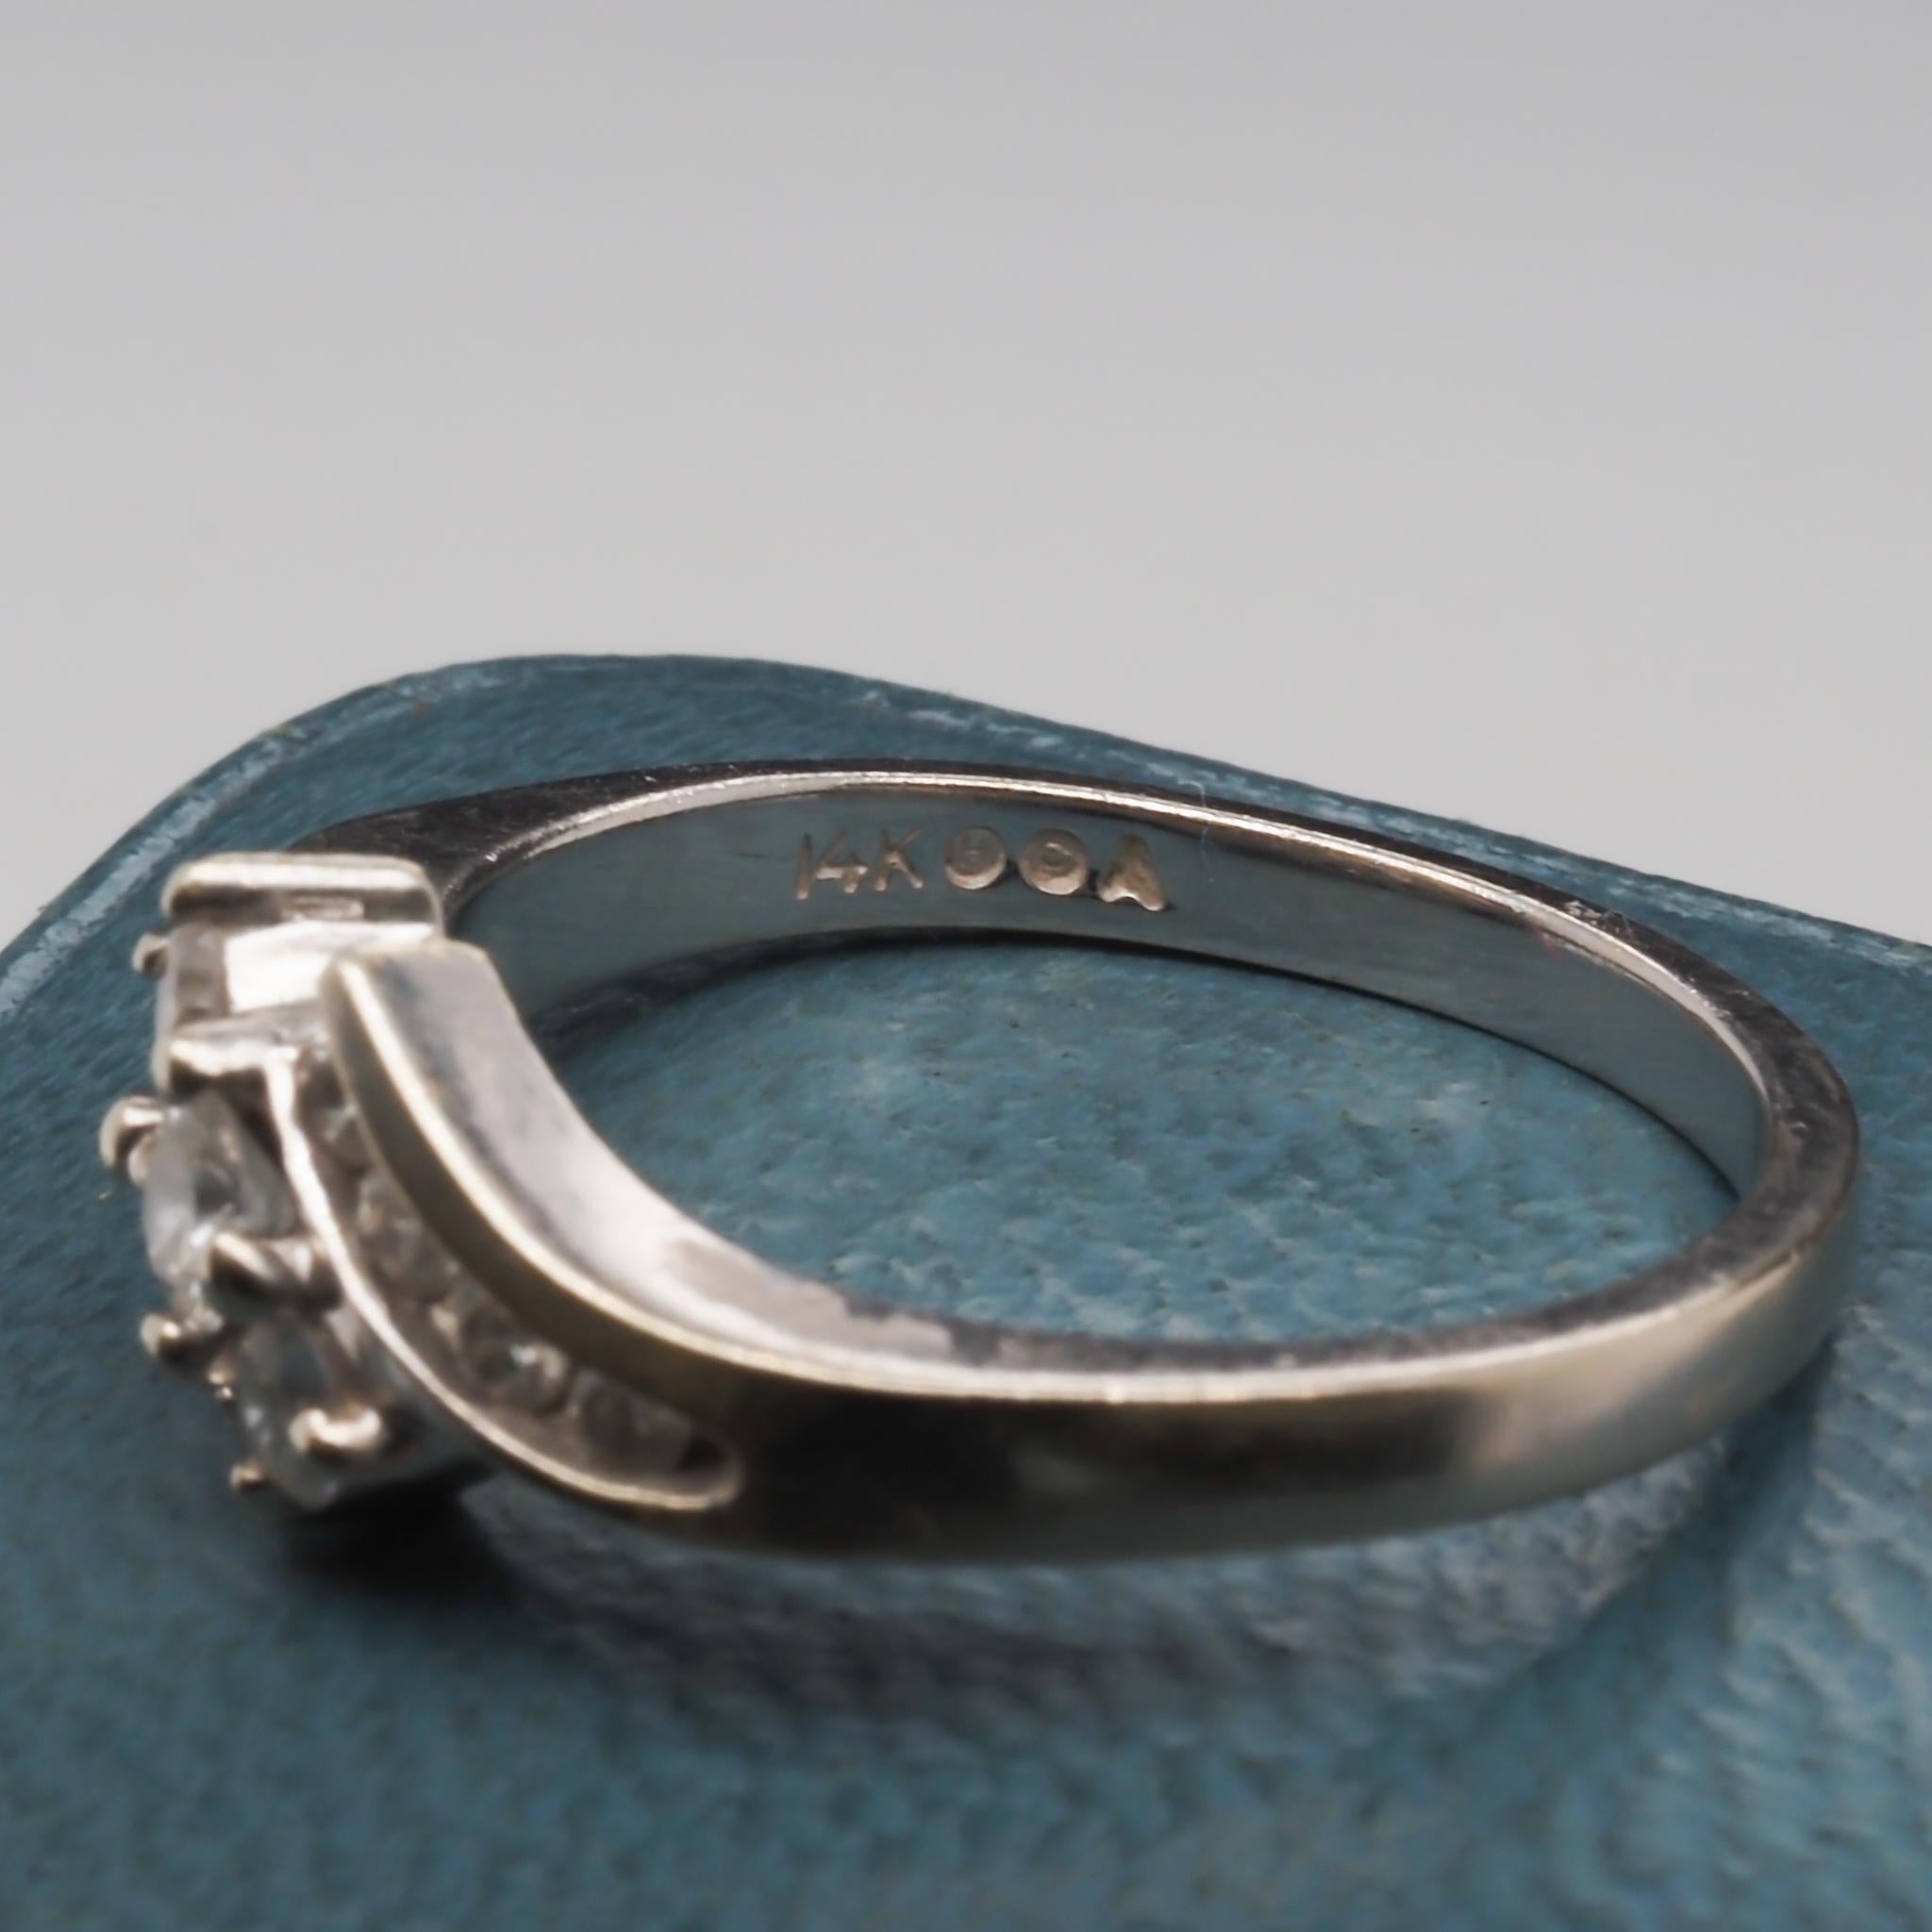 Ring Size: 7.25
Metal Type: 14k White Gold [Hallmarked, and Tested]
Weight: 3.7 grams
‌
Band Width: 2mm
Condition: Excellent